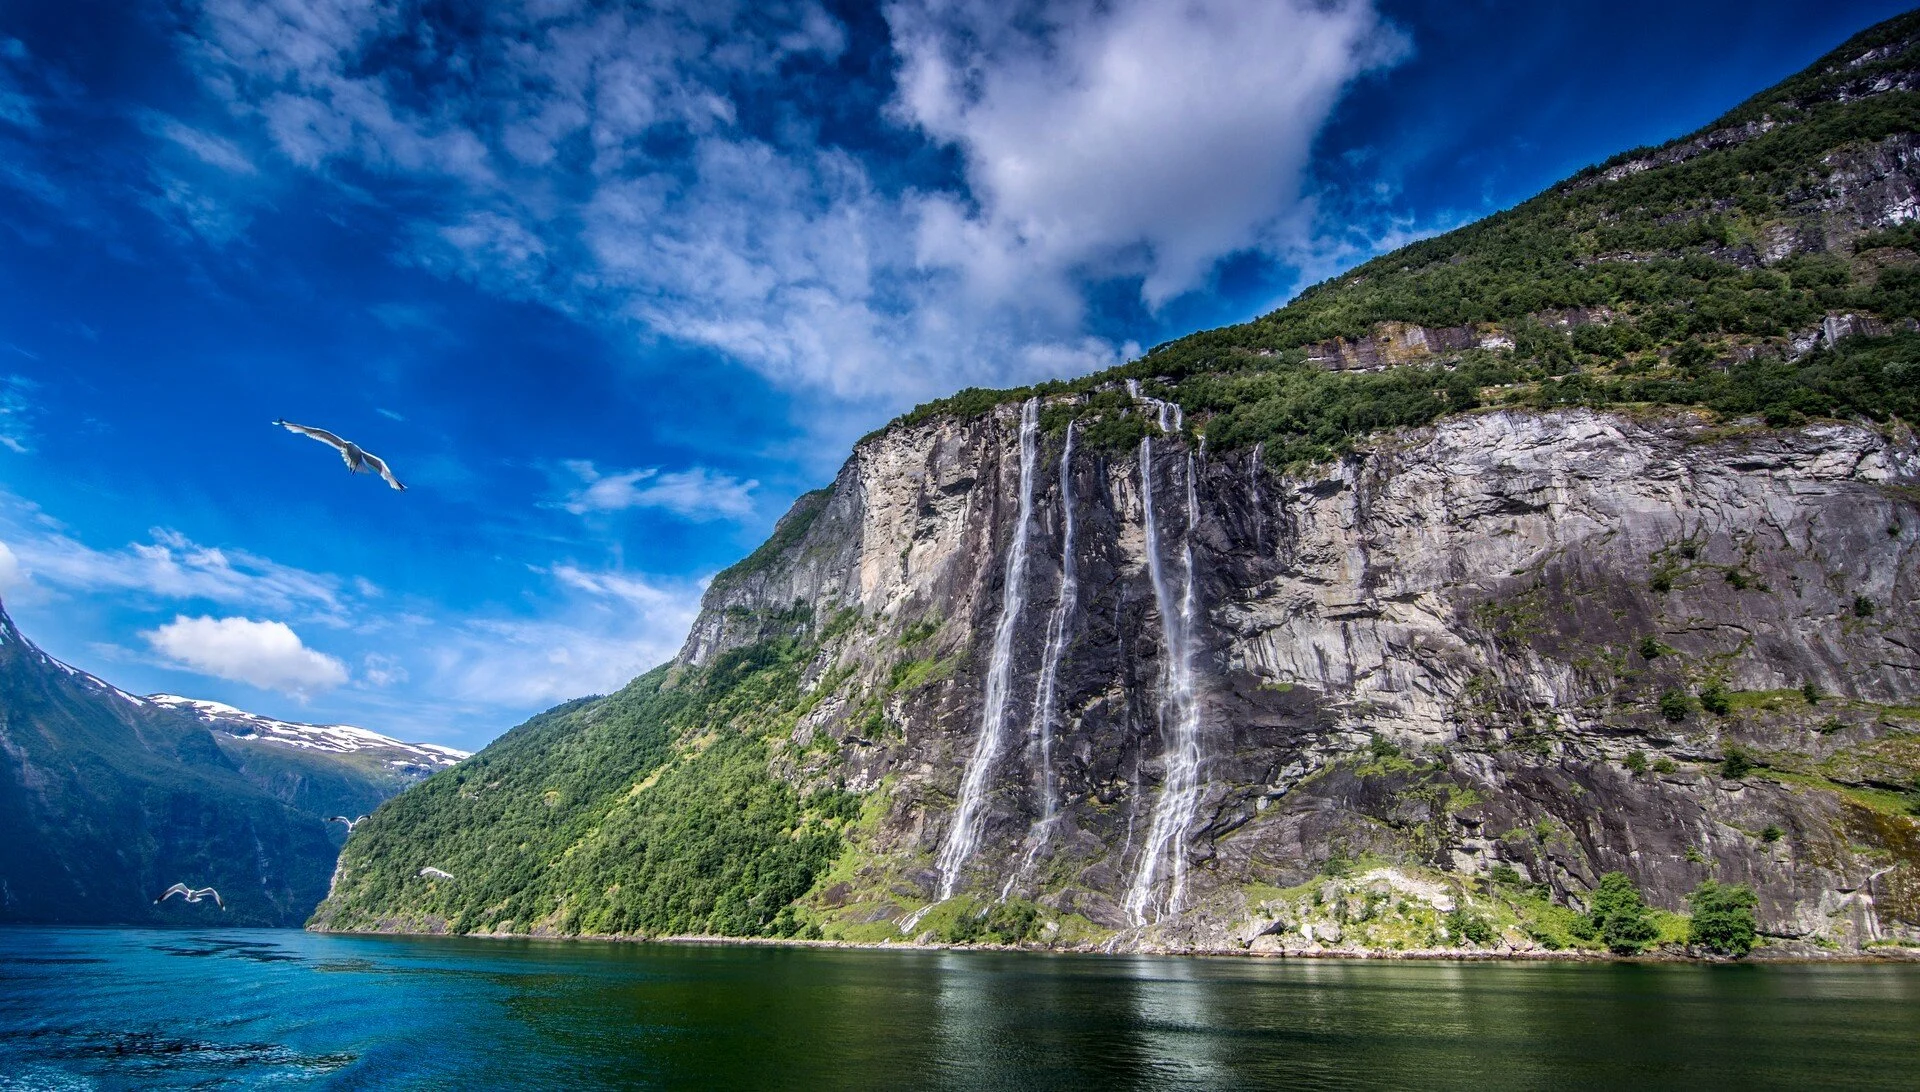 the-seven-sisters-waterfall-geiranger-norway-hgr-139068_1920-photo_shutterstock